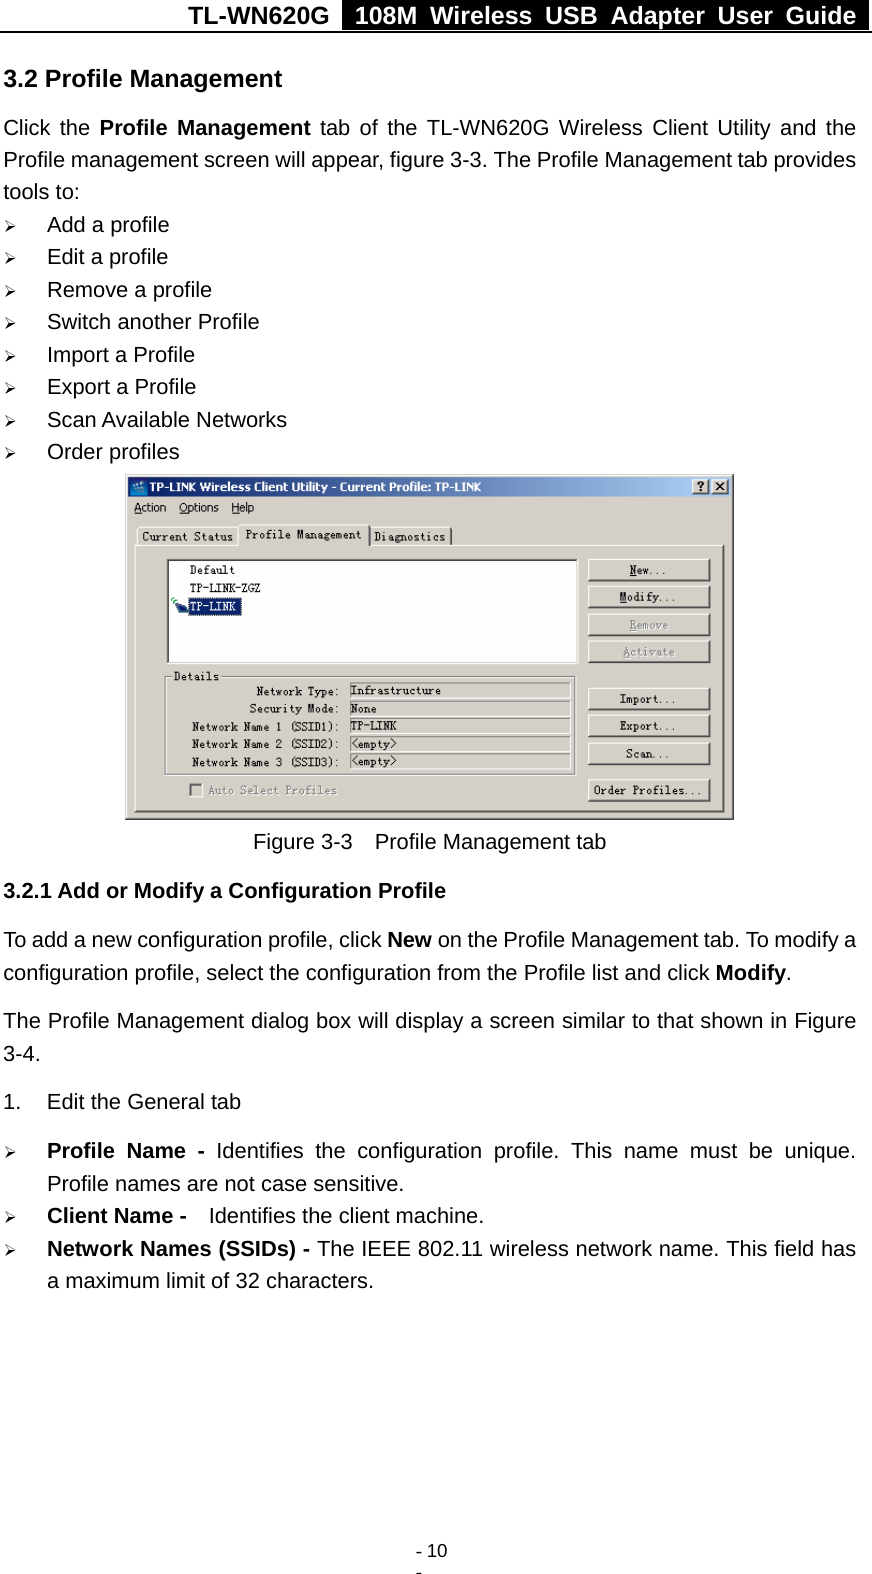 TL-WN620G   108M Wireless USB Adapter User Guide    - 10 - 3.2 Profile Management Click the Profile Management tab of the TL-WN620G Wireless Client Utility and the Profile management screen will appear, figure 3-3. The Profile Management tab provides tools to: ¾ Add a profile ¾ Edit a profile ¾ Remove a profile ¾ Switch another Profile ¾ Import a Profile ¾ Export a Profile ¾ Scan Available Networks ¾ Order profiles  Figure 3-3    Profile Management tab 3.2.1 Add or Modify a Configuration Profile To add a new configuration profile, click New on the Profile Management tab. To modify a configuration profile, select the configuration from the Profile list and click Modify. The Profile Management dialog box will display a screen similar to that shown in Figure 3-4. 1.  Edit the General tab ¾ Profile Name - Identifies the configuration profile. This name must be unique. Profile names are not case sensitive. ¾ Client Name -  Identifies the client machine. ¾ Network Names (SSIDs) - The IEEE 802.11 wireless network name. This field has a maximum limit of 32 characters. 